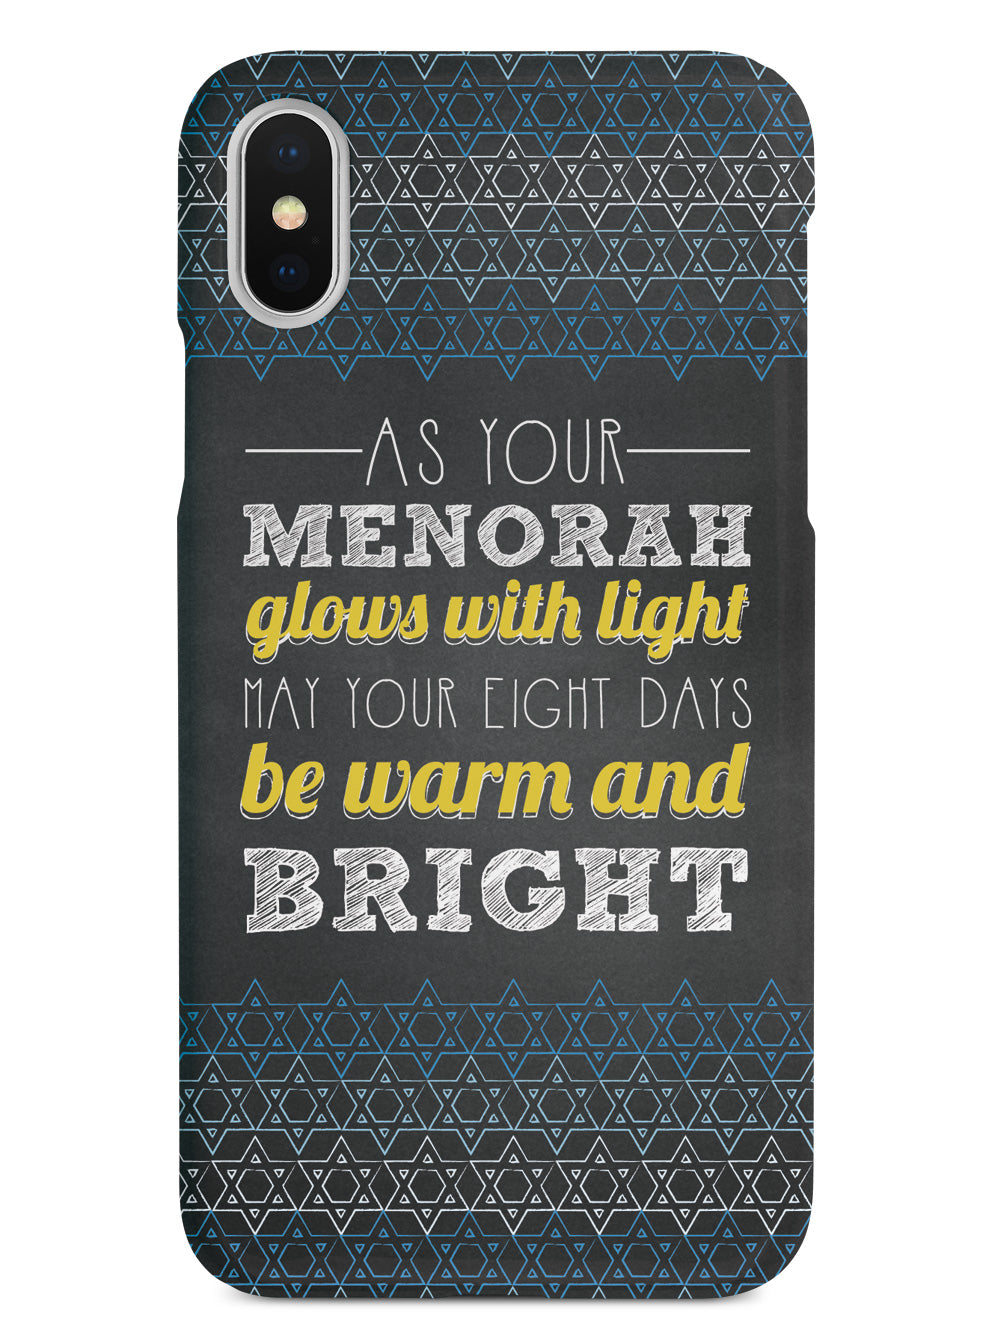 May Your Eight Days Be Warm and Bright - Hanukkah Case